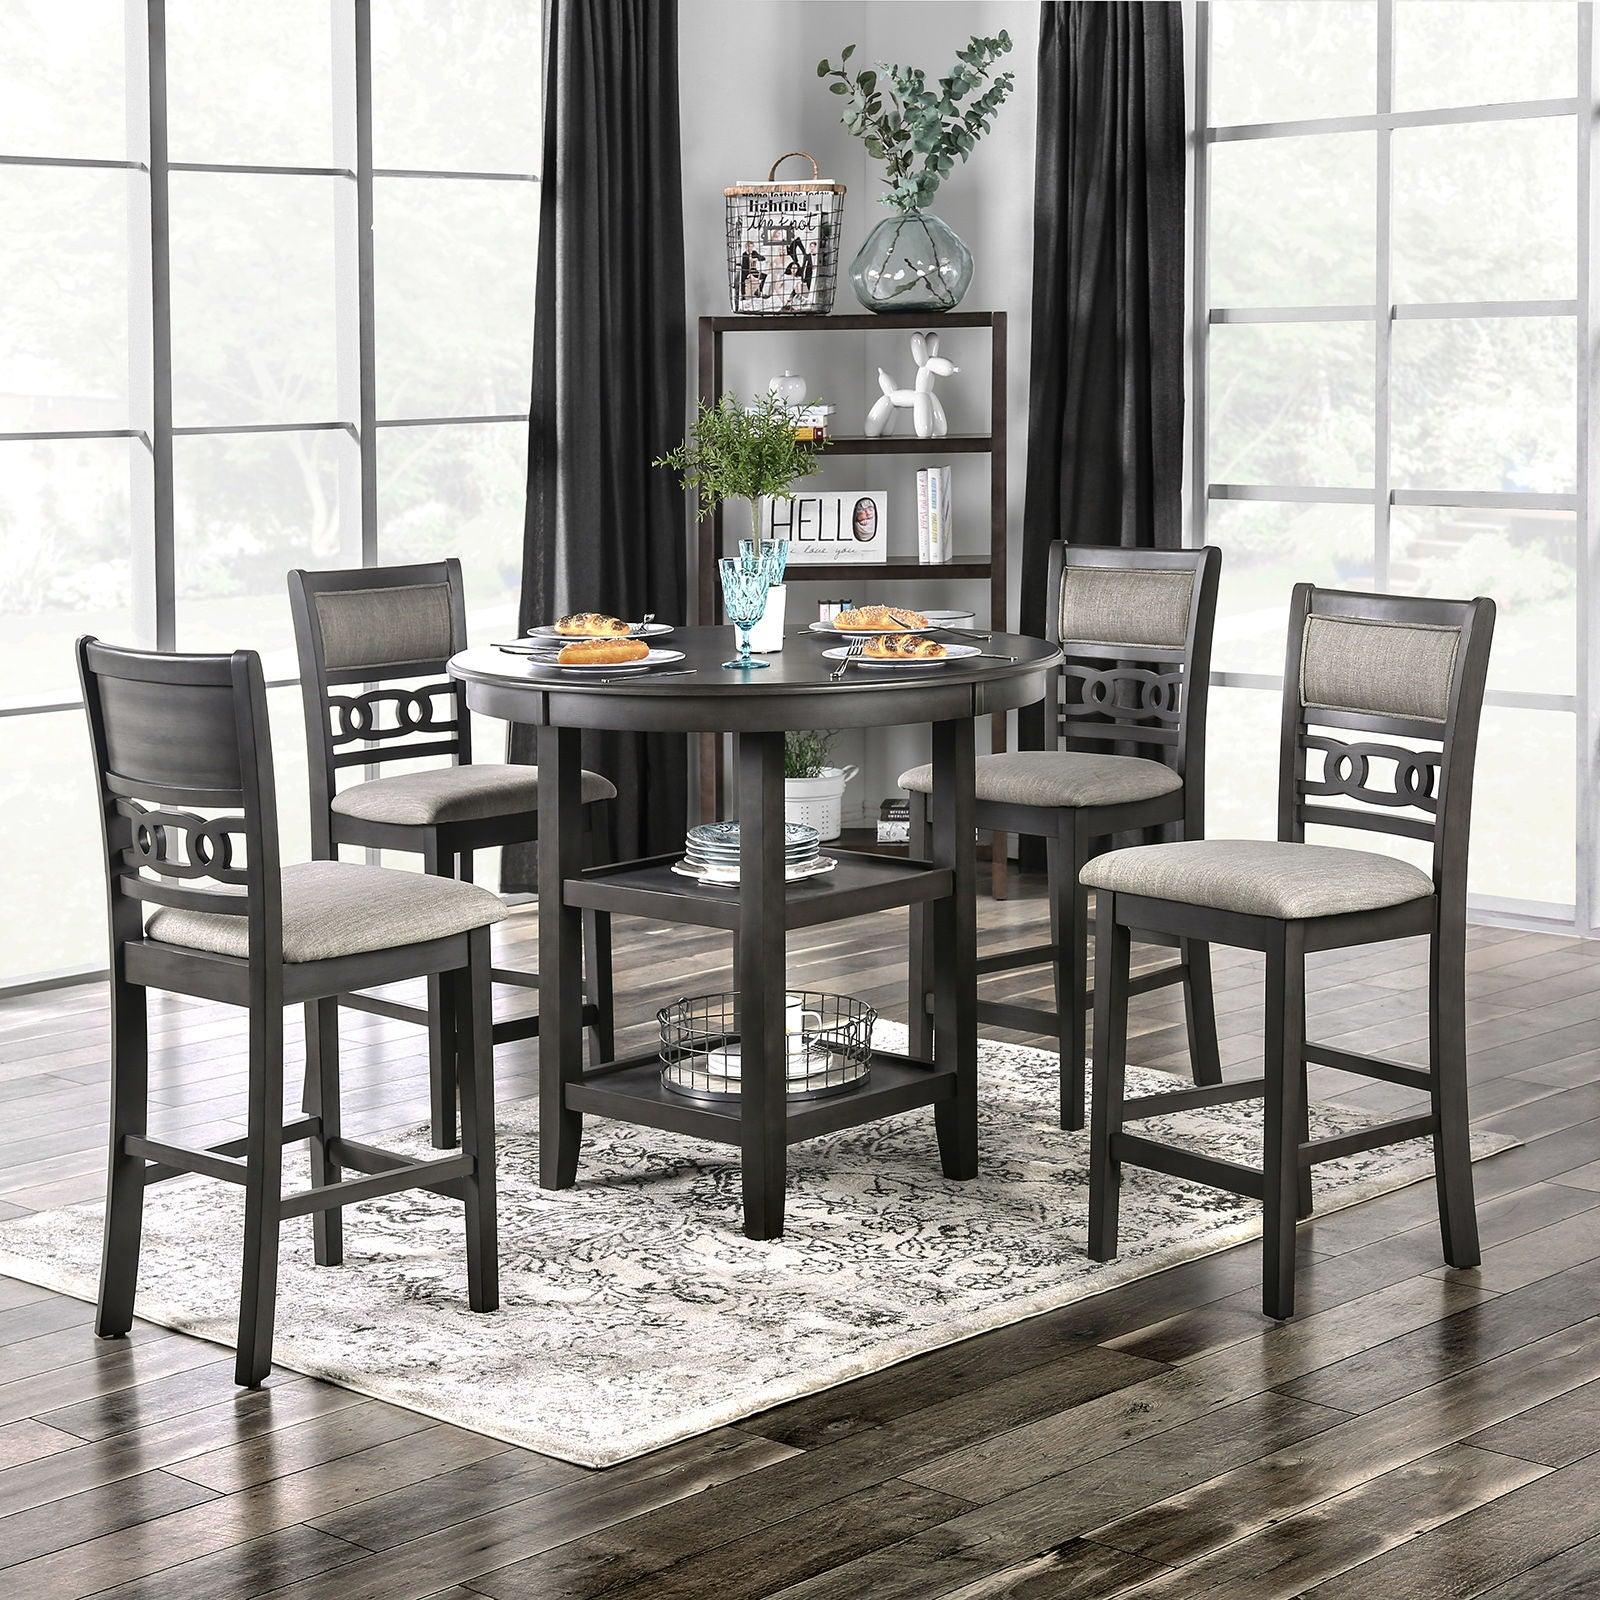 Furniture of America - Milly - 5 Piece Counter Height Set - Gray - 5th Avenue Furniture